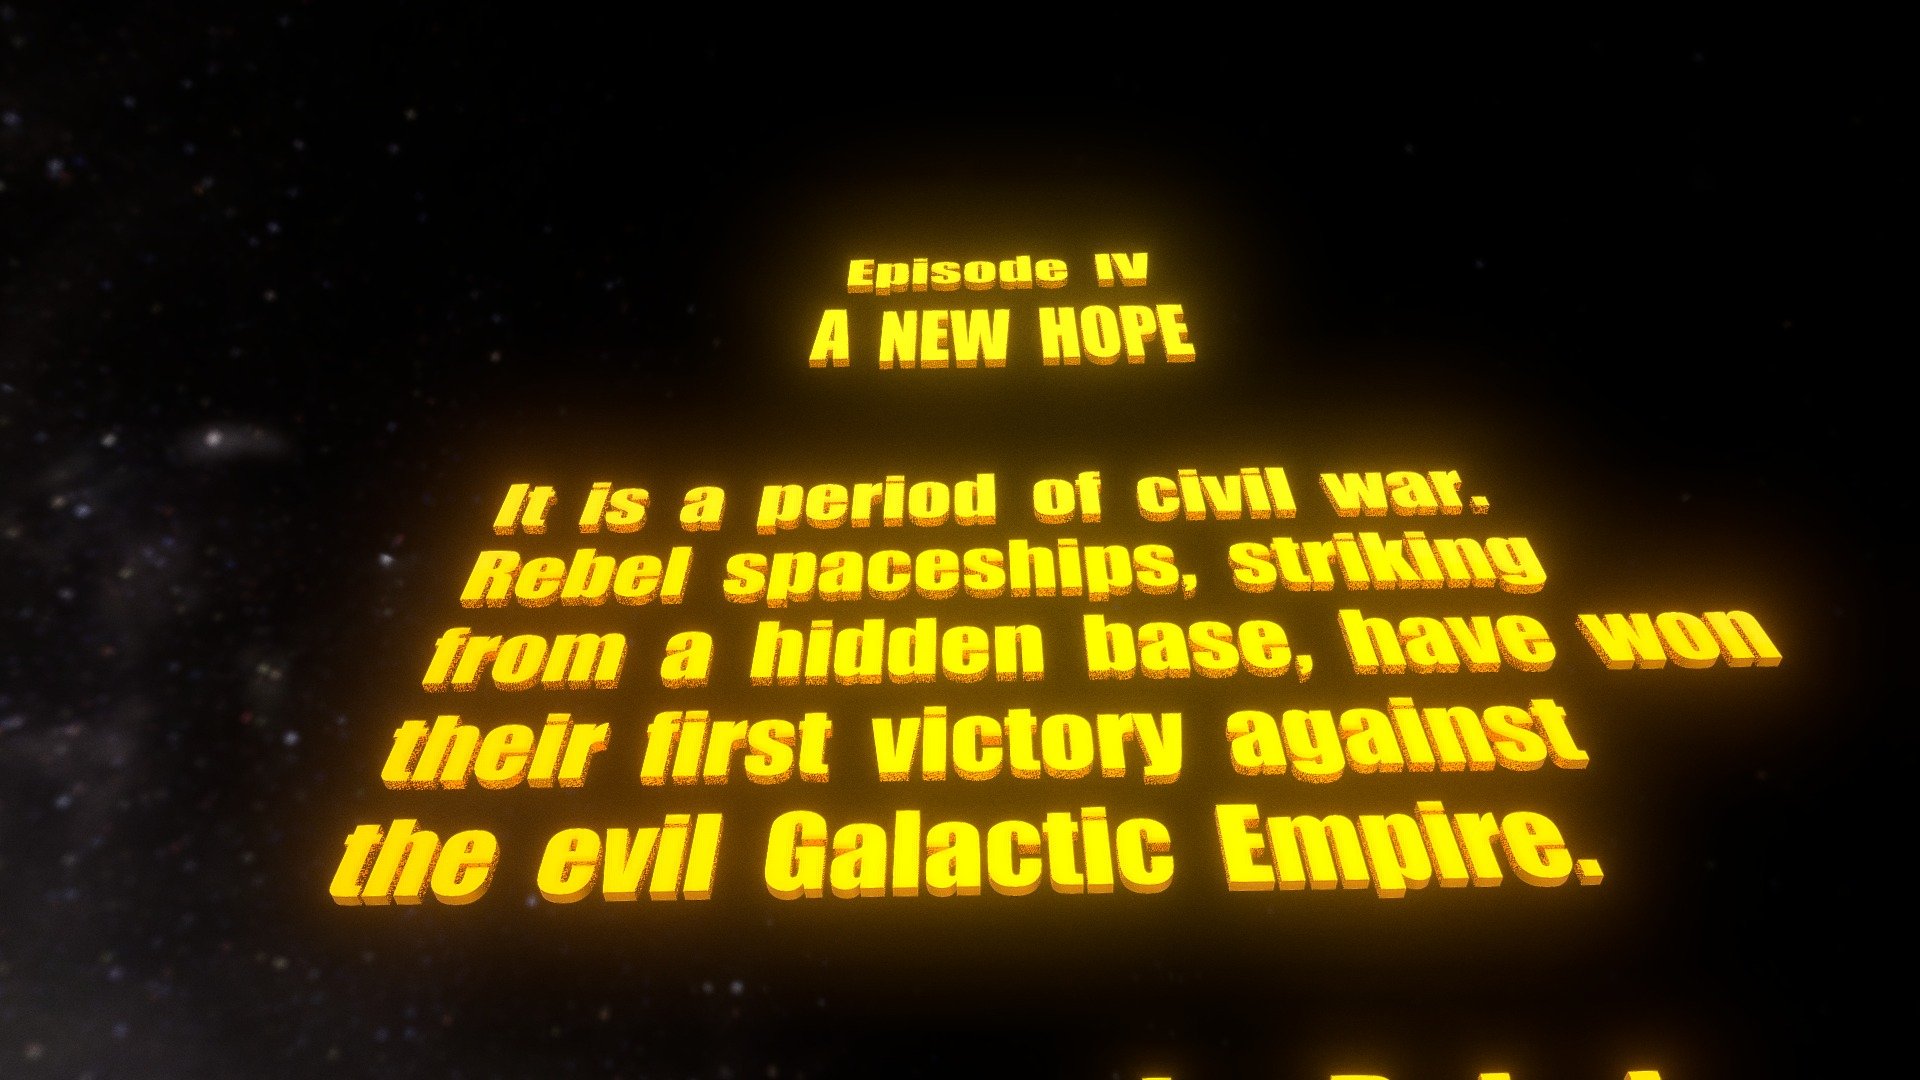 Star Wars New Hope Opening Crawl (Animation) - Download Free 3D model